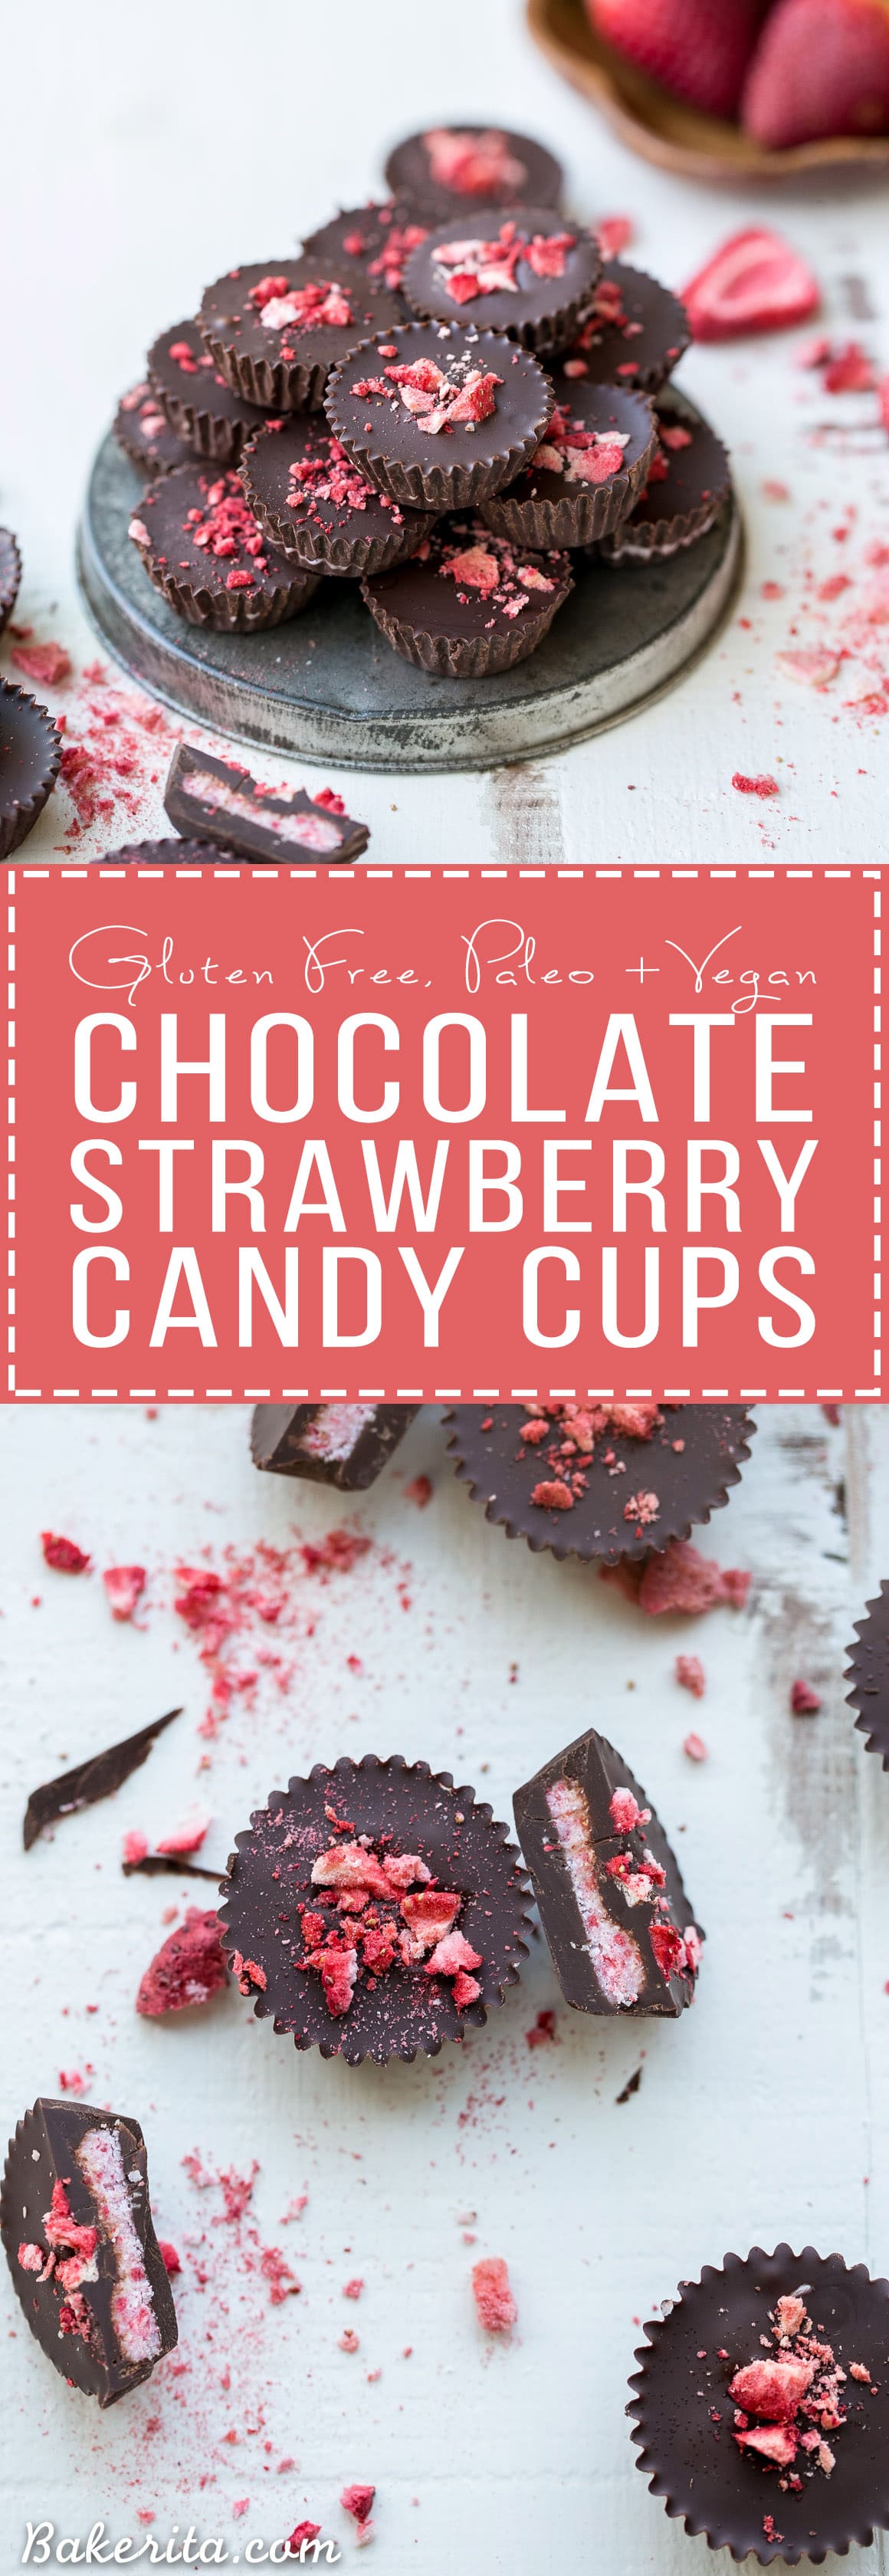 These Chocolate Strawberry Cups have a creamy strawberry + coconut butter filling encased in homemade chocolate! These gluten-free, Paleo + vegan candy cups will satisfy your sweet tooth more healthfully.